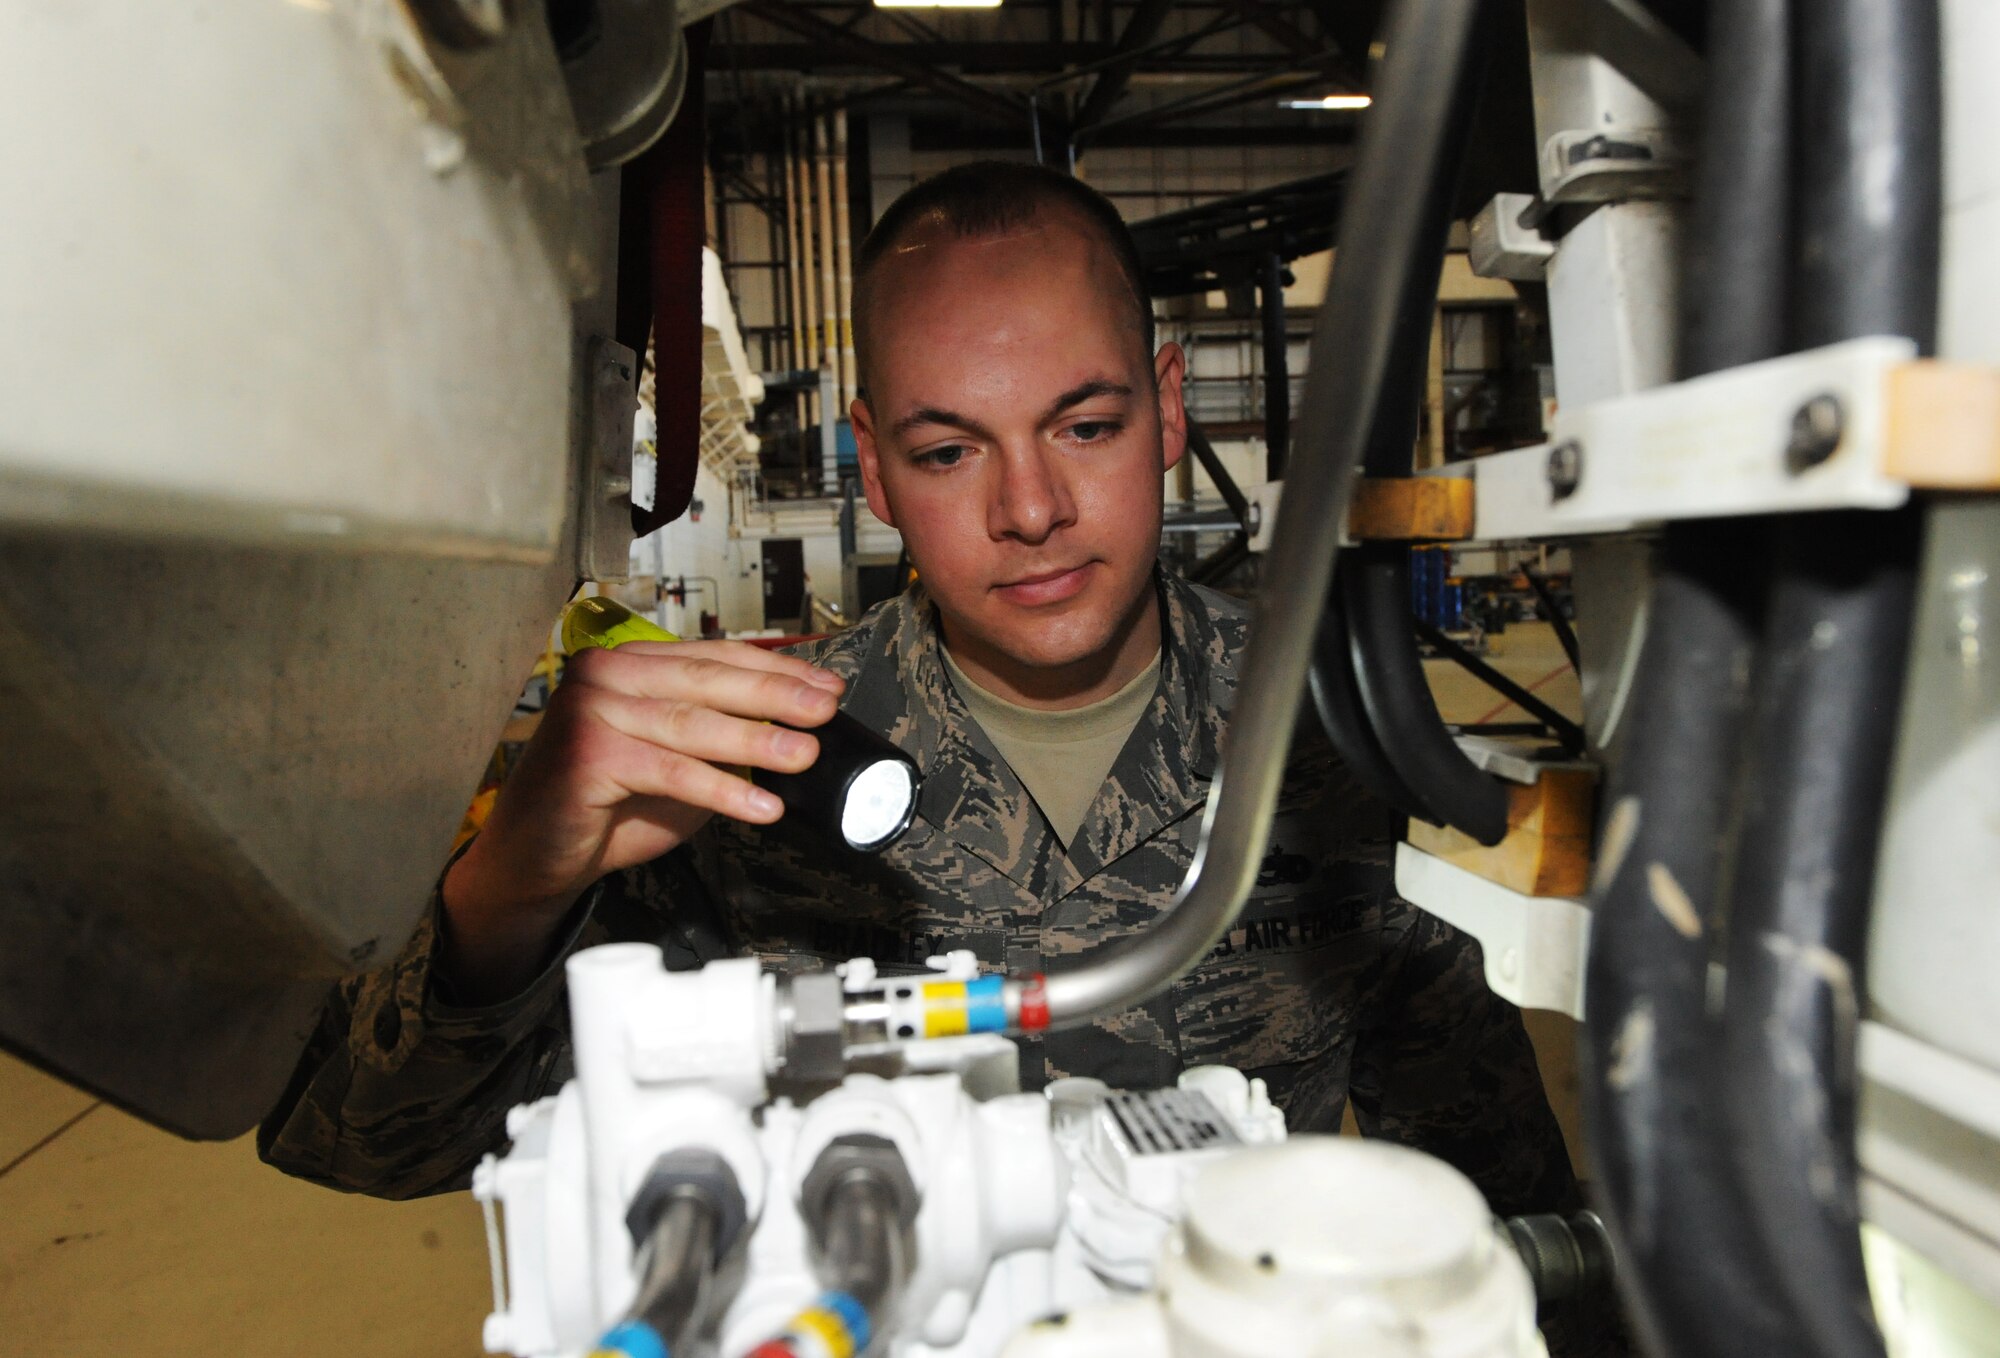 U.S. Air Force Tech Sgt. Aaron Bradley, a 393d Aircraft Maintenance Unit specialist section chief, inspects the hydraulic lines of a B-2 Spirit at Whiteman Air Force Base, Mo., Feb. 18, 2016. The inspection of the 4,000 psi hydraulic system tests operation of the B-2 flight controls, landing gear, brakes, steering and weapon systems. (U.S. Air Force photo by Tech. Sgt. Miguel Lara III)